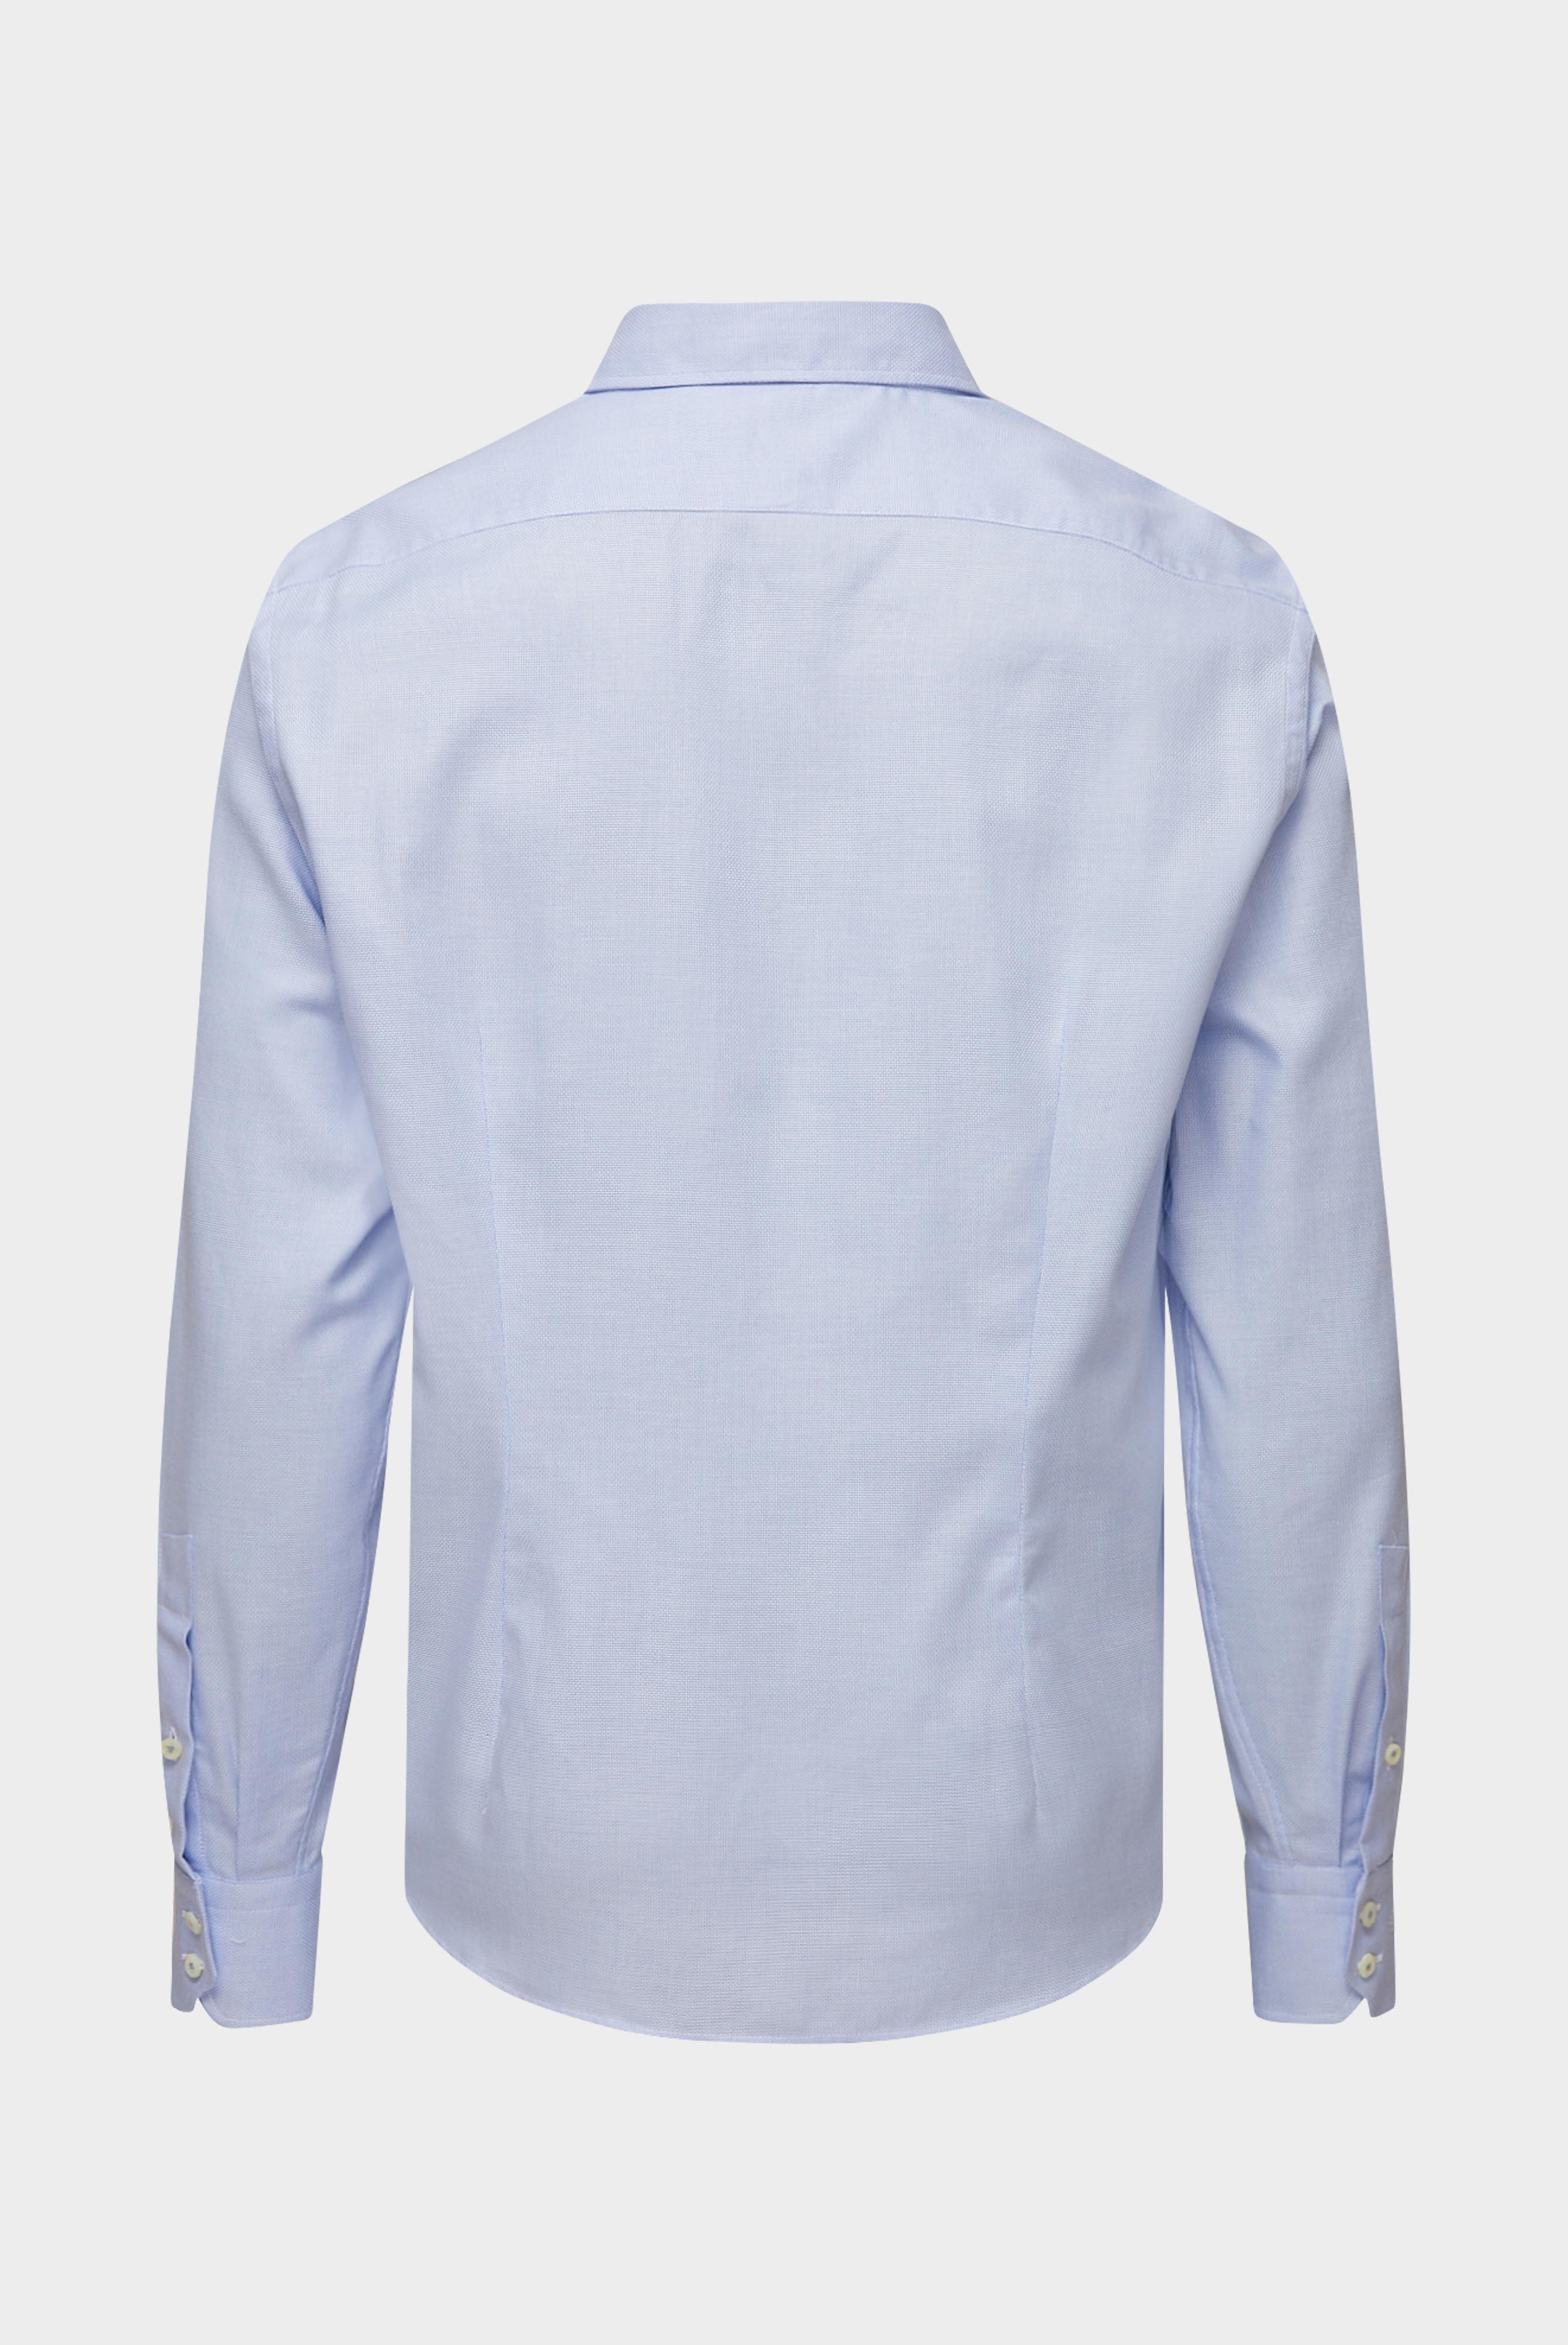 Business Shirts+Business shirt made of dobby cotton+20.3283.NV.161680.730.38